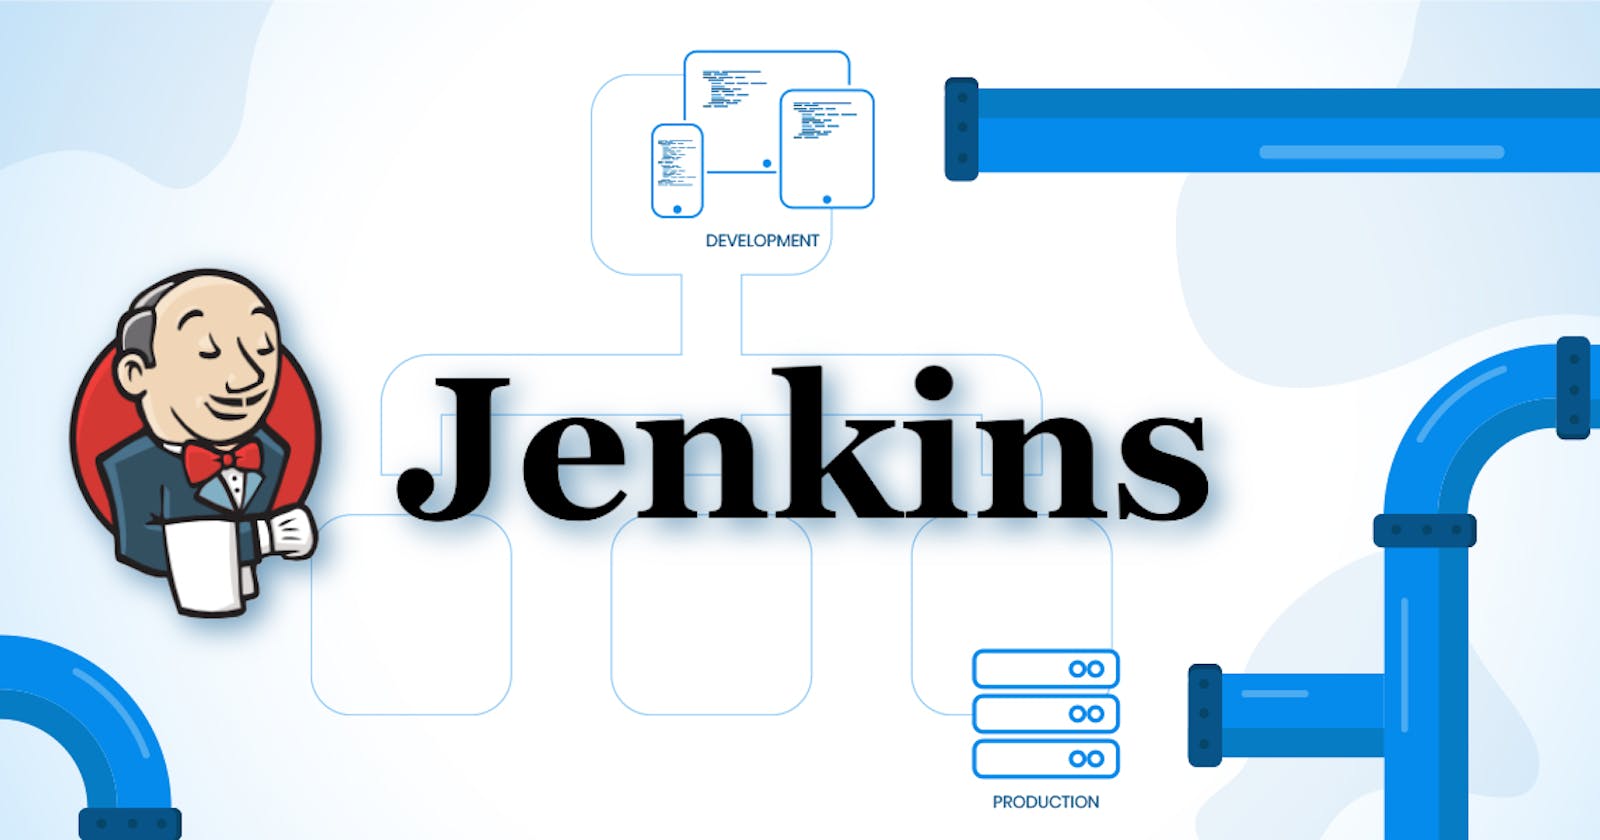 Introduction of Jenkins pipeline